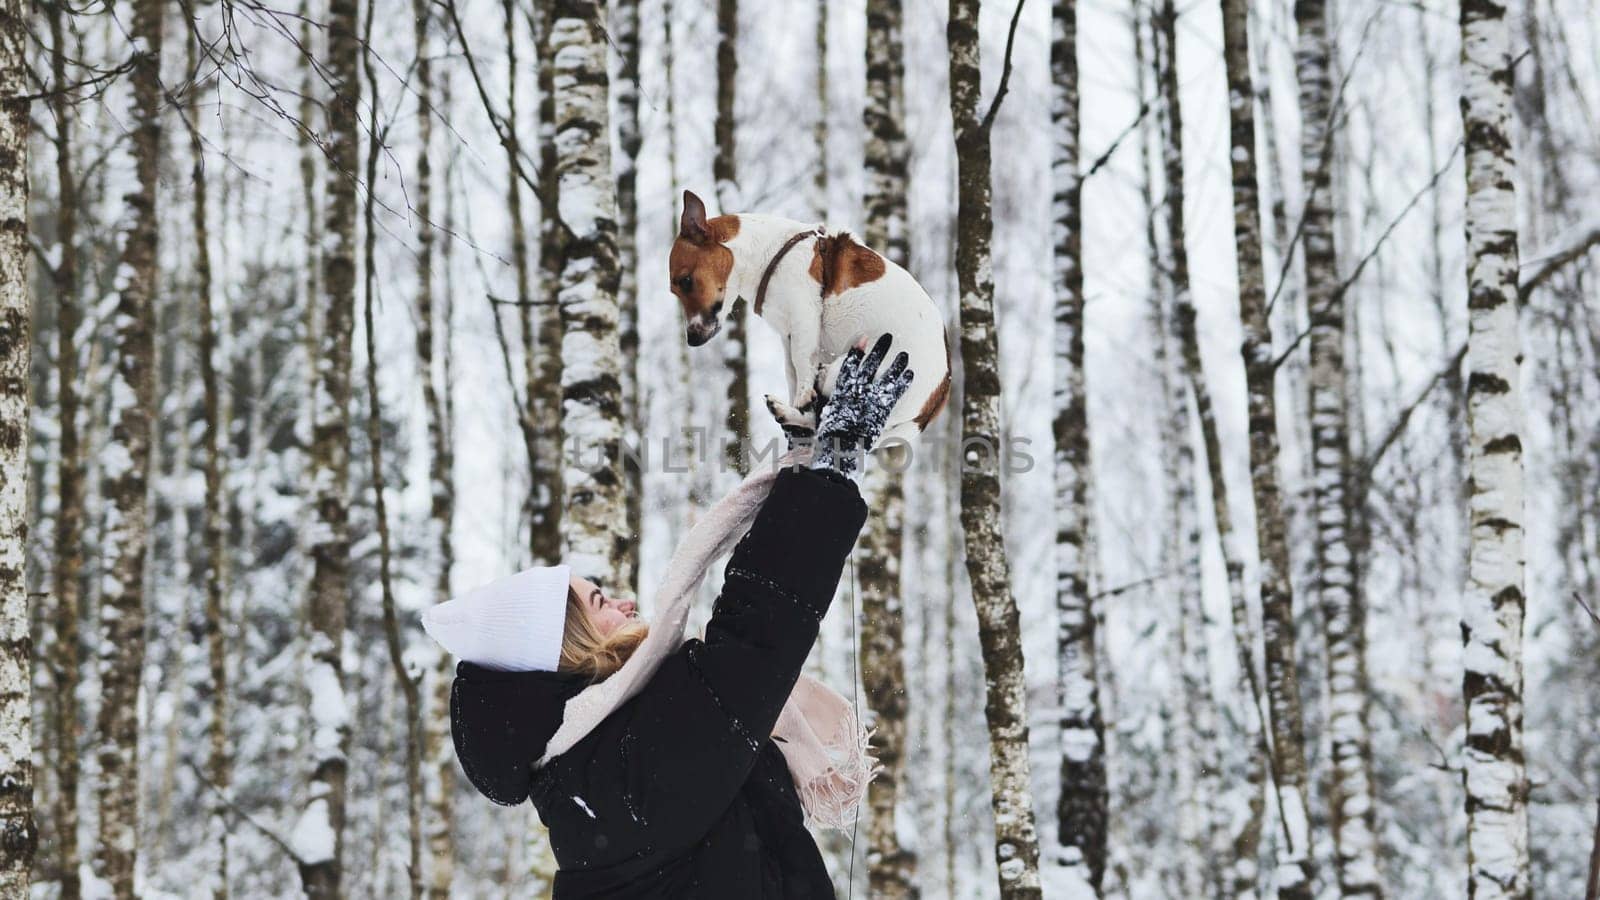 A girl tosses up her Jack Russell Terrier dog in the woods in winter